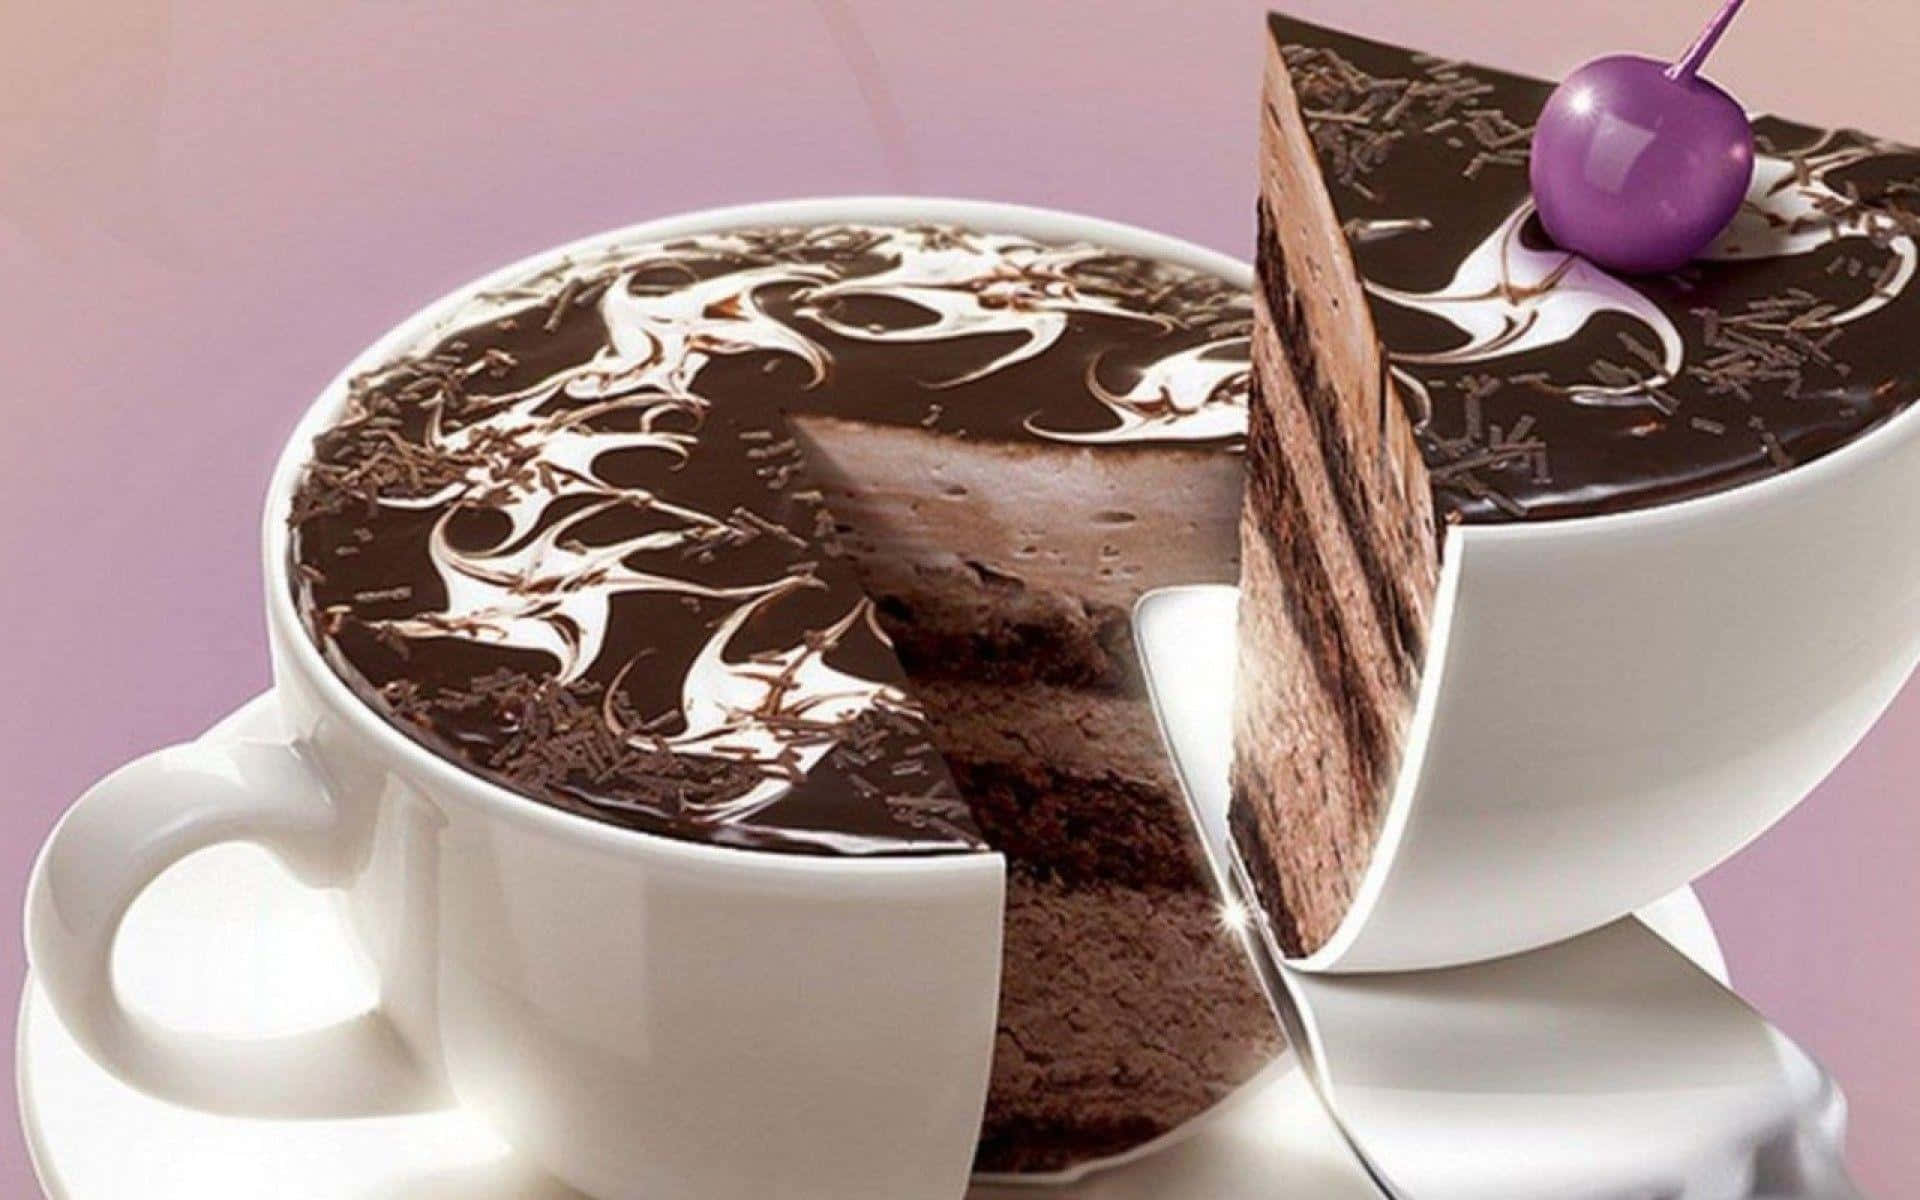 Enjoy an unparalleled indulgence with this sweet homemade Chocolate Cake!